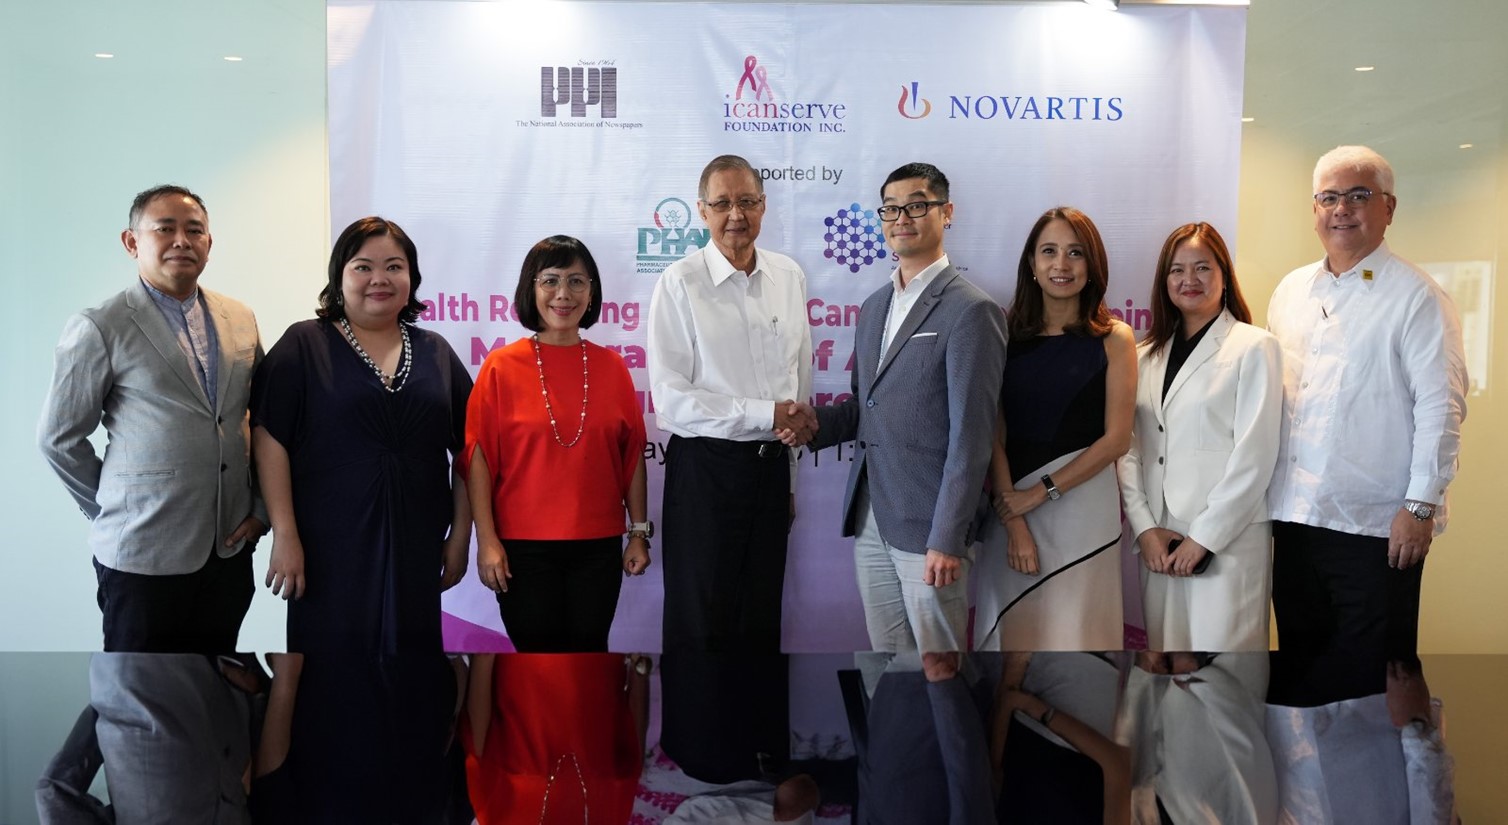 <em>Recognizing the key role of media in health literacy promotion, Novartis Healthcare Philippines, Philippine Press Institute (PPI), and ICanServe Foundation have signed a Memorandum of Agreement (MOA) to organize a workshop that aims to help local journalists gain a deeper understanding of breast cancer. Photo shows (from left) Mr. Ariel Sebellino, Executive Director, PPI; Ms. Joyce Pañares, Seminar Director, PPI; Ms. Christine Fajardo, Communications &amp; Engagement Head, Novartis Healthcare Philippines &amp; Asia Aspiring Innovative Medicines; Mr. Rolando Estabillo, Chairman &amp; President, PPI; Mr. Joel Chong, President, Novartis Healthcare Philippines; Ms. Kara Magsanoc-Alikpala, Founding President of ICanServe Foundation and Vice President for Internal Affairs of Cancer Coalition Philippines; Ms. Marian Pausanos, Public Affairs Head, Pharmaceutical and Healthcare Association of the Philippines (PHAP); and Mr. Teodoro Padilla, Executive Director, PHAP. Photo by Kier Labrador</em>